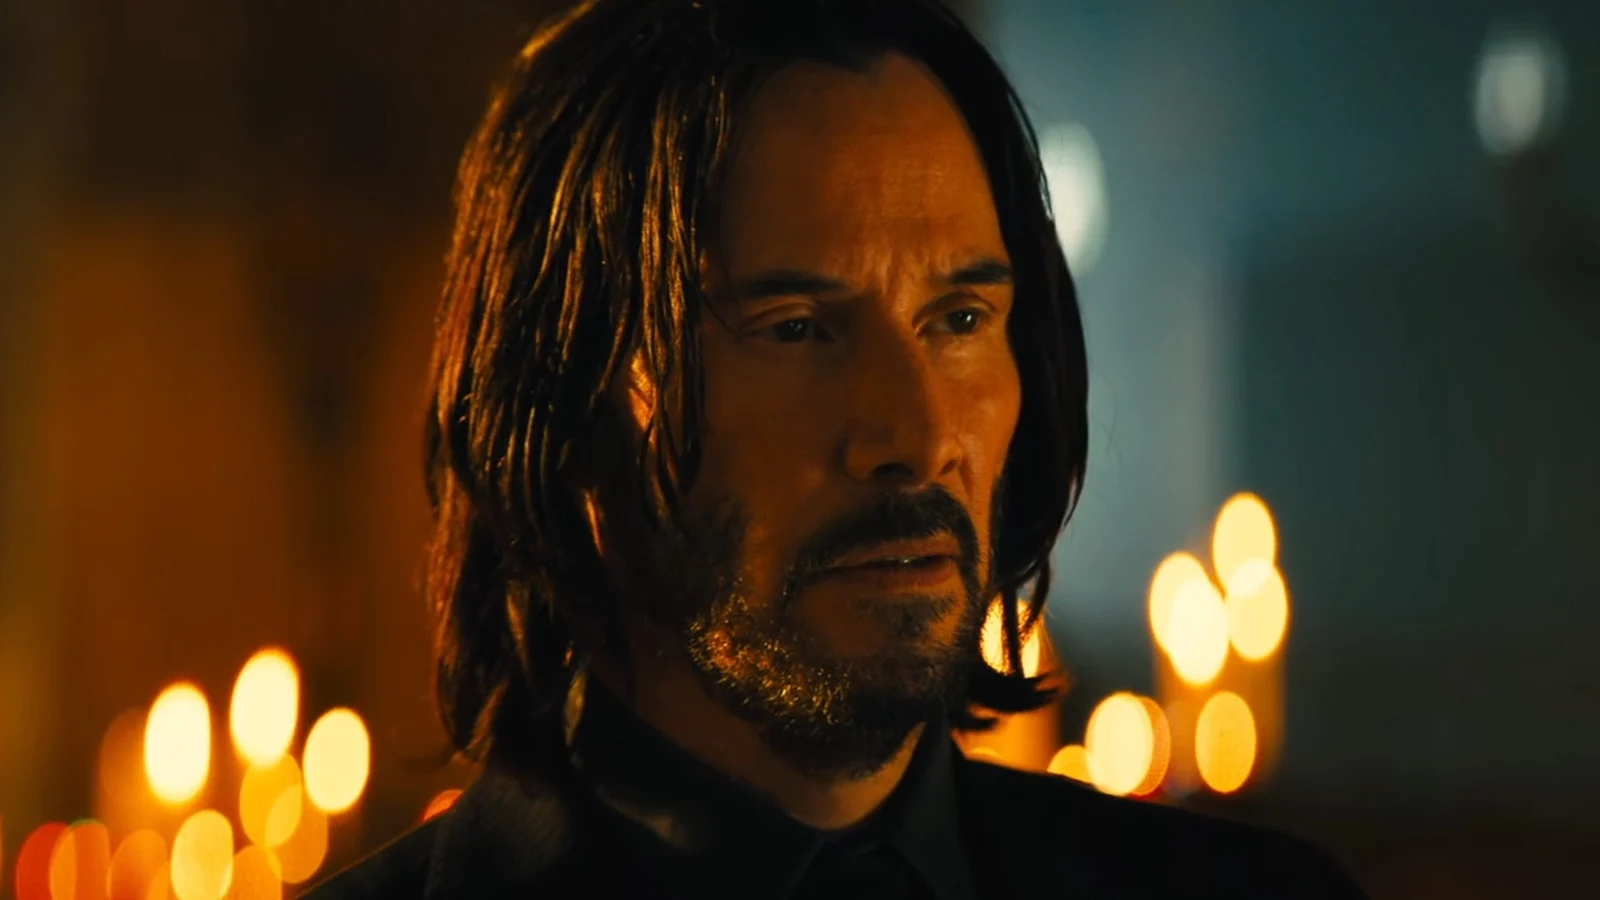 John Wick 5: the film won't be made without Keanu Reeves, Lionsgate confirms